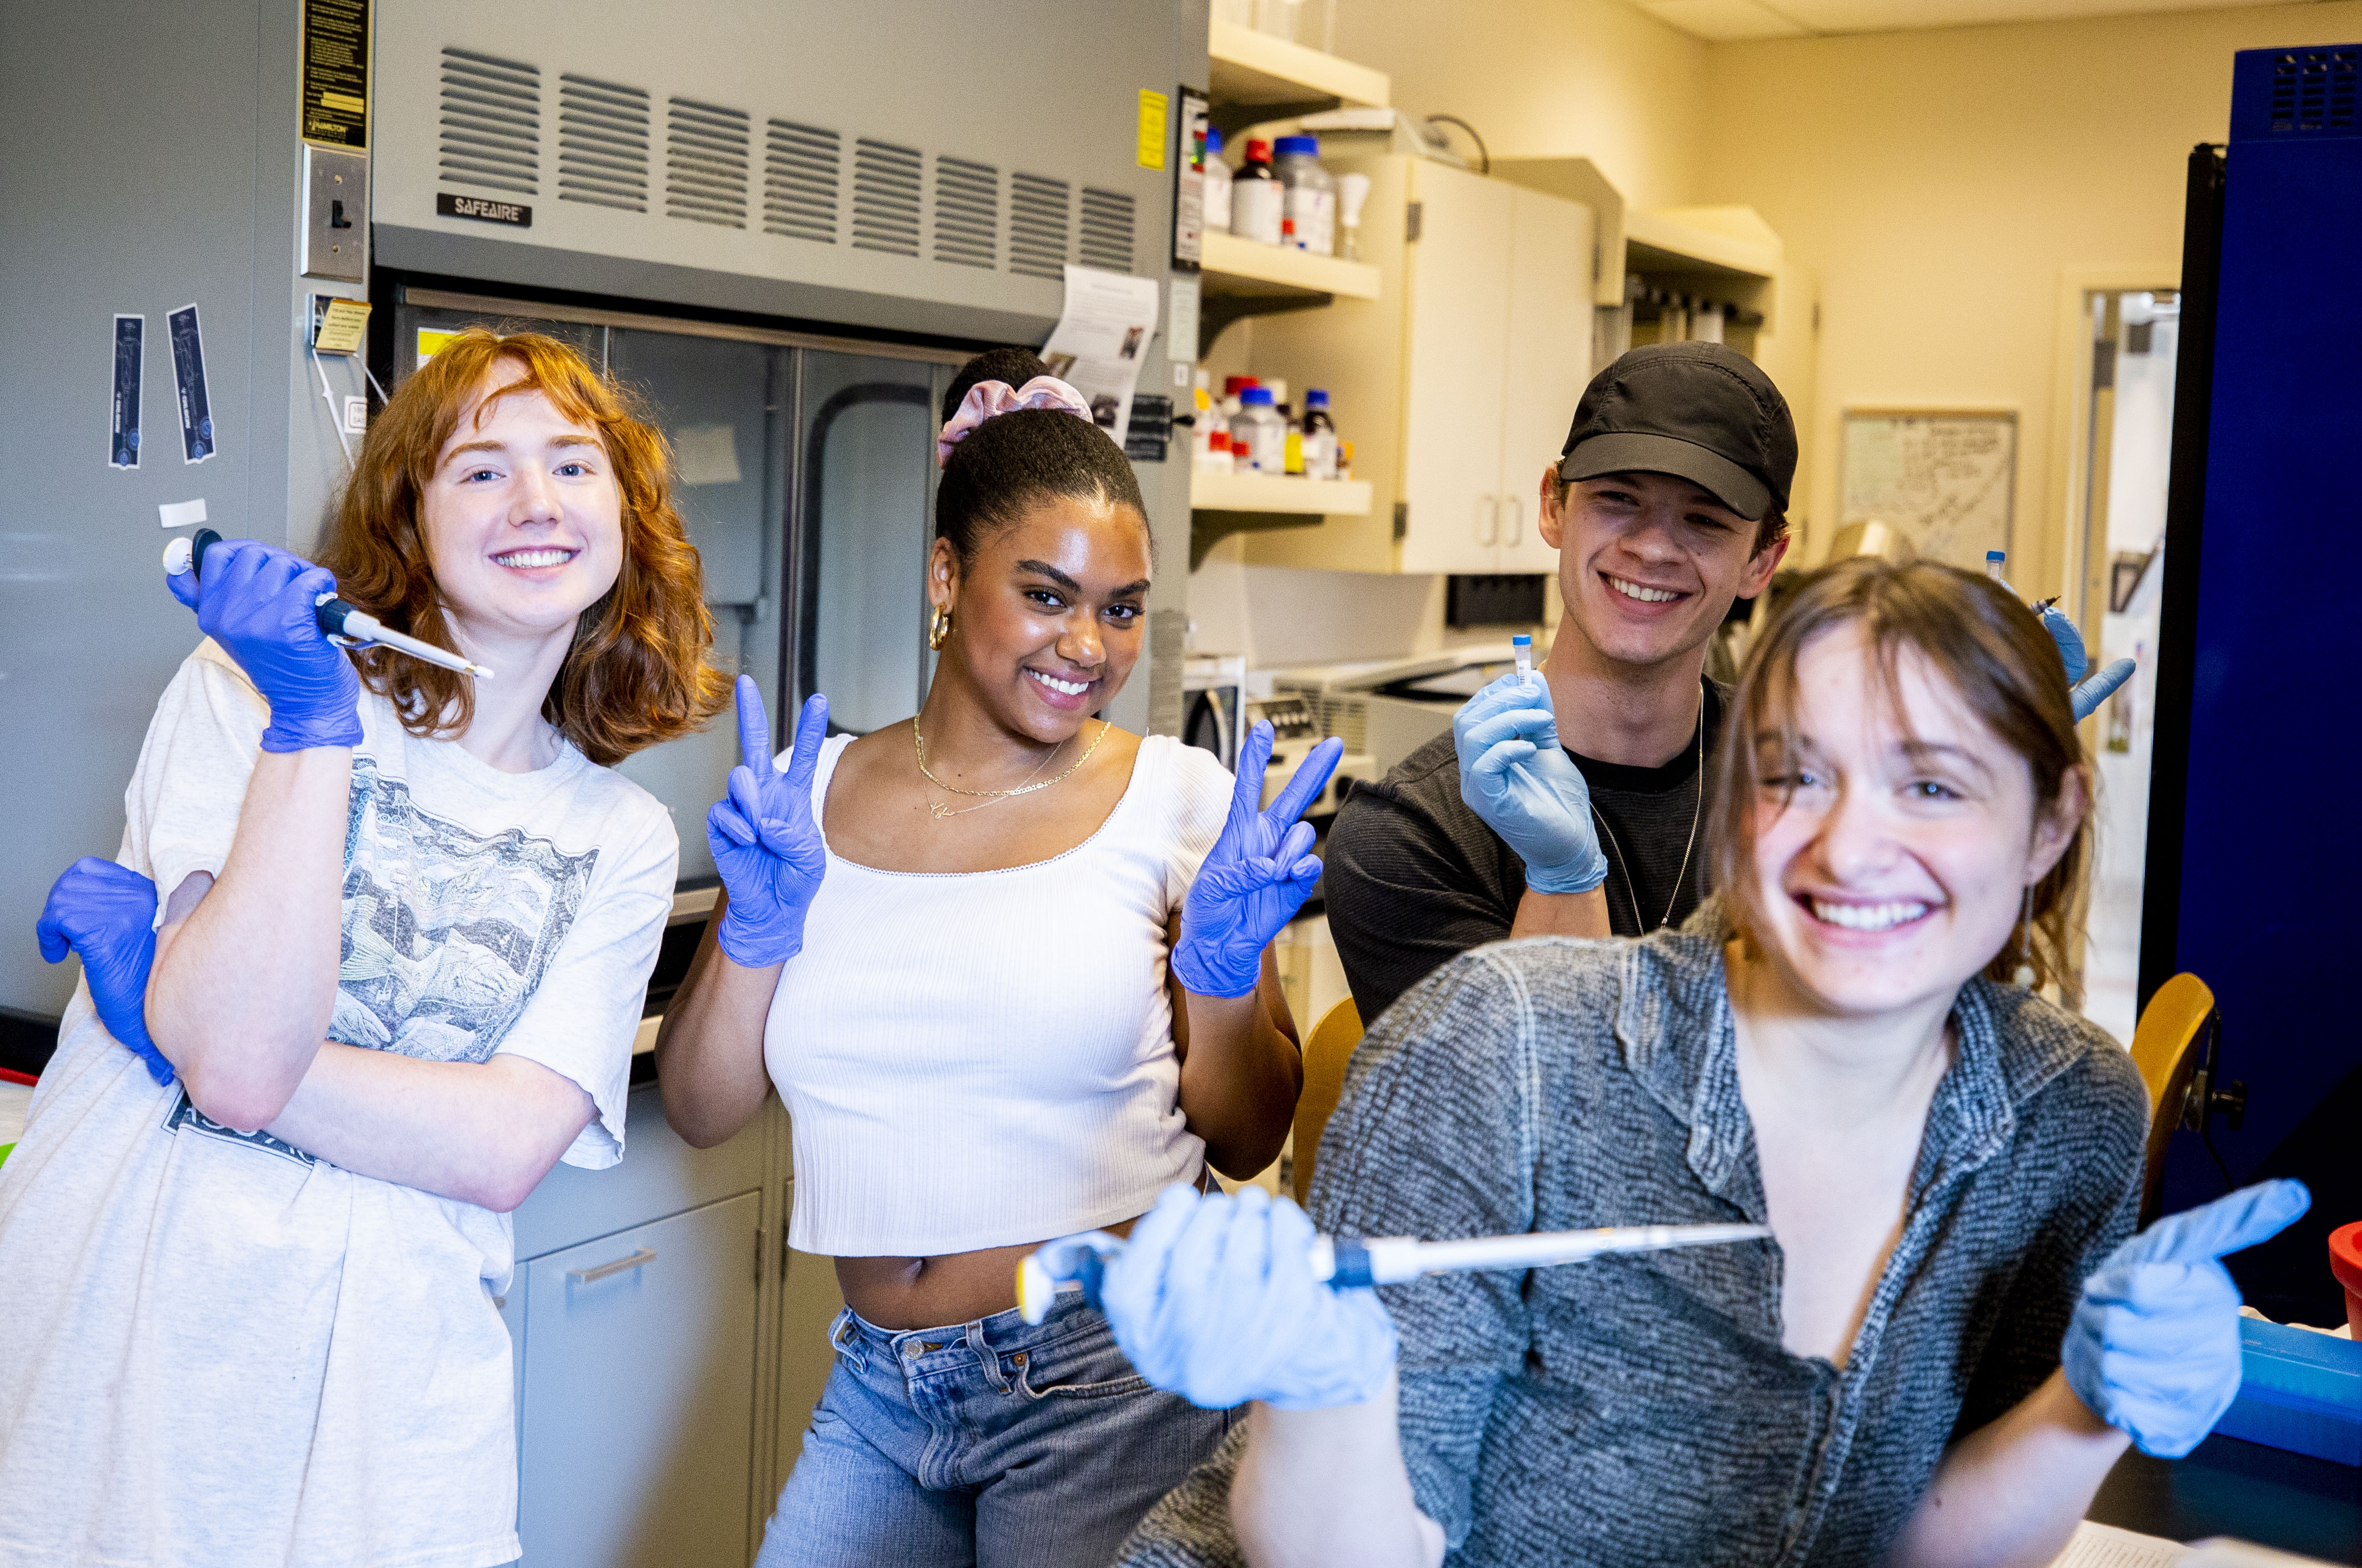 Four students pose for a photo with pipettes in a lab.